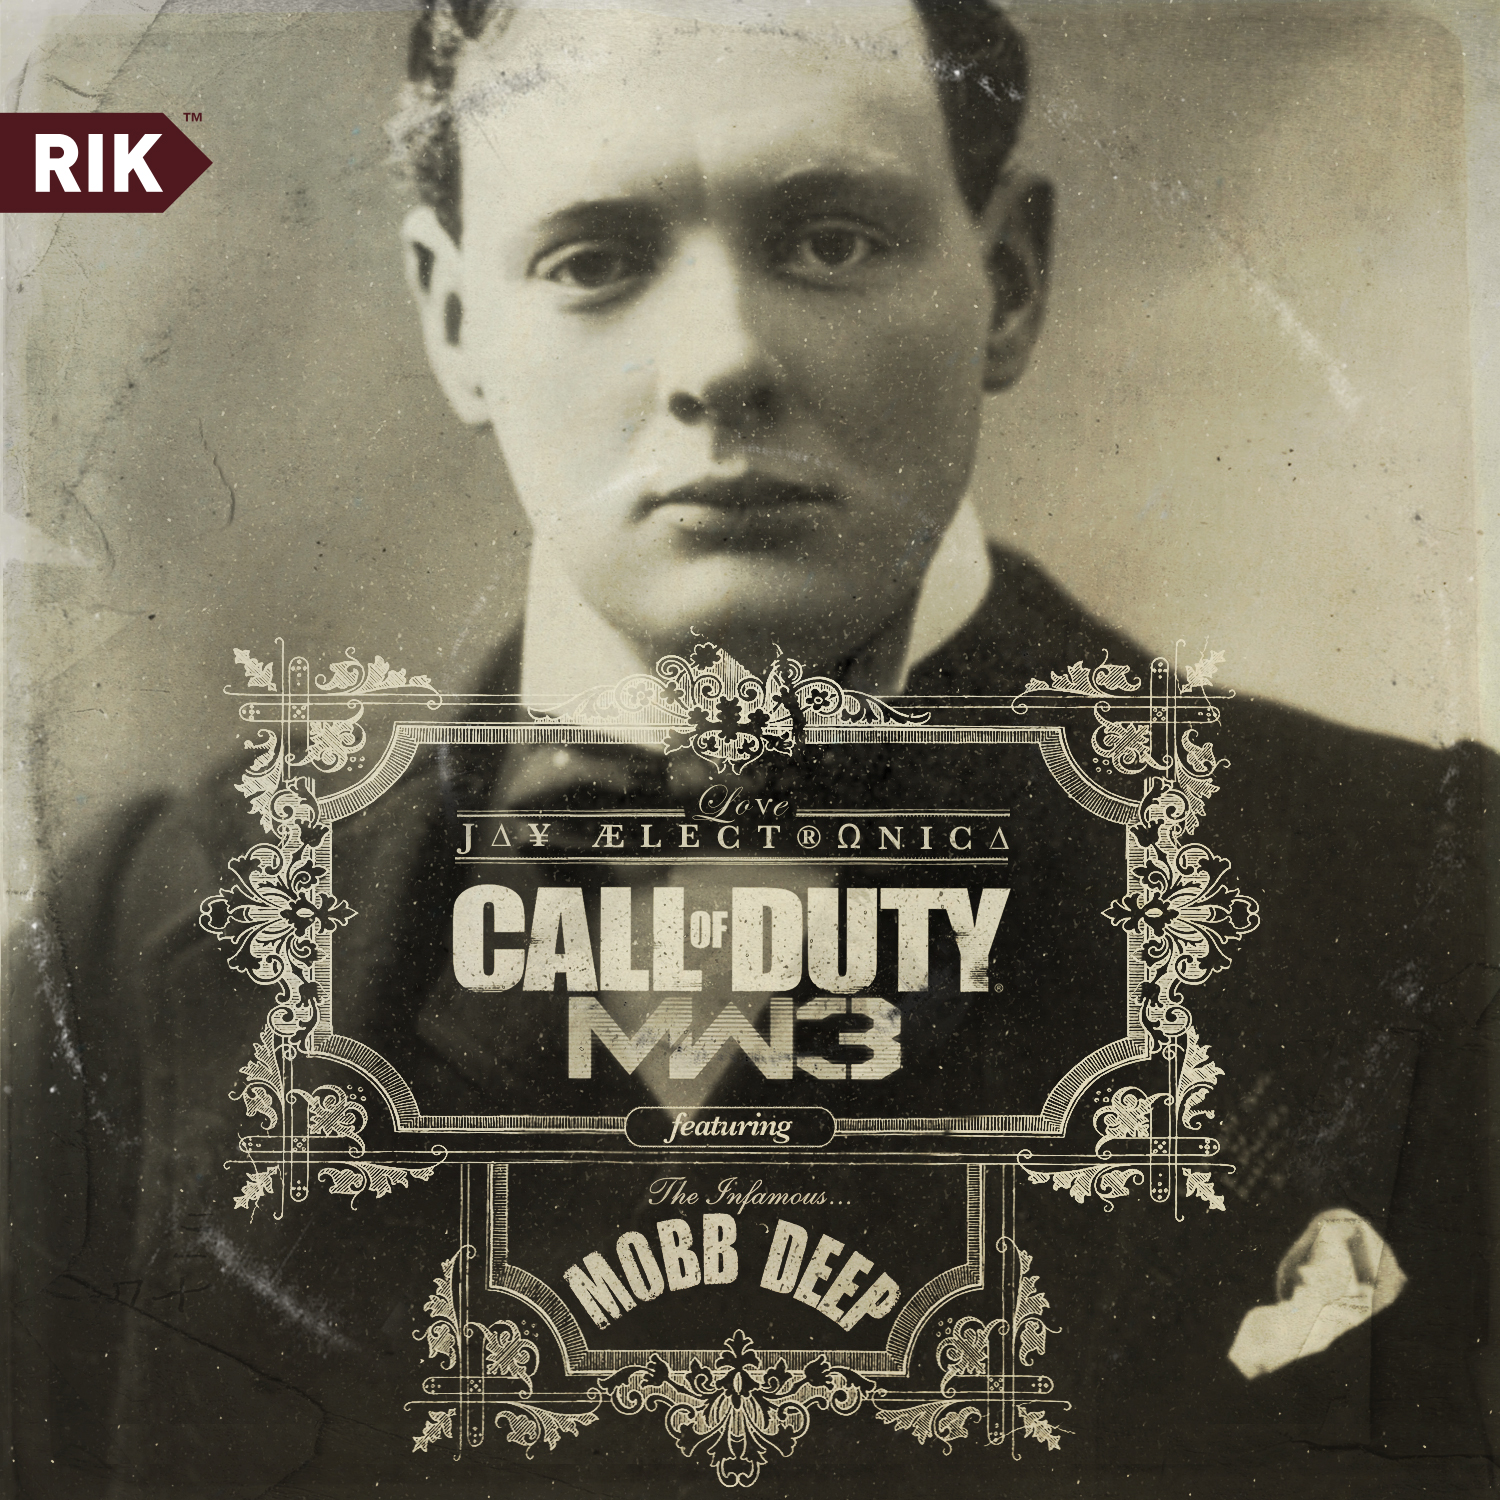 Jay Electronica — “Call of Duty: Modern Warfare 3” featuring Prodigy of Mobb Deep